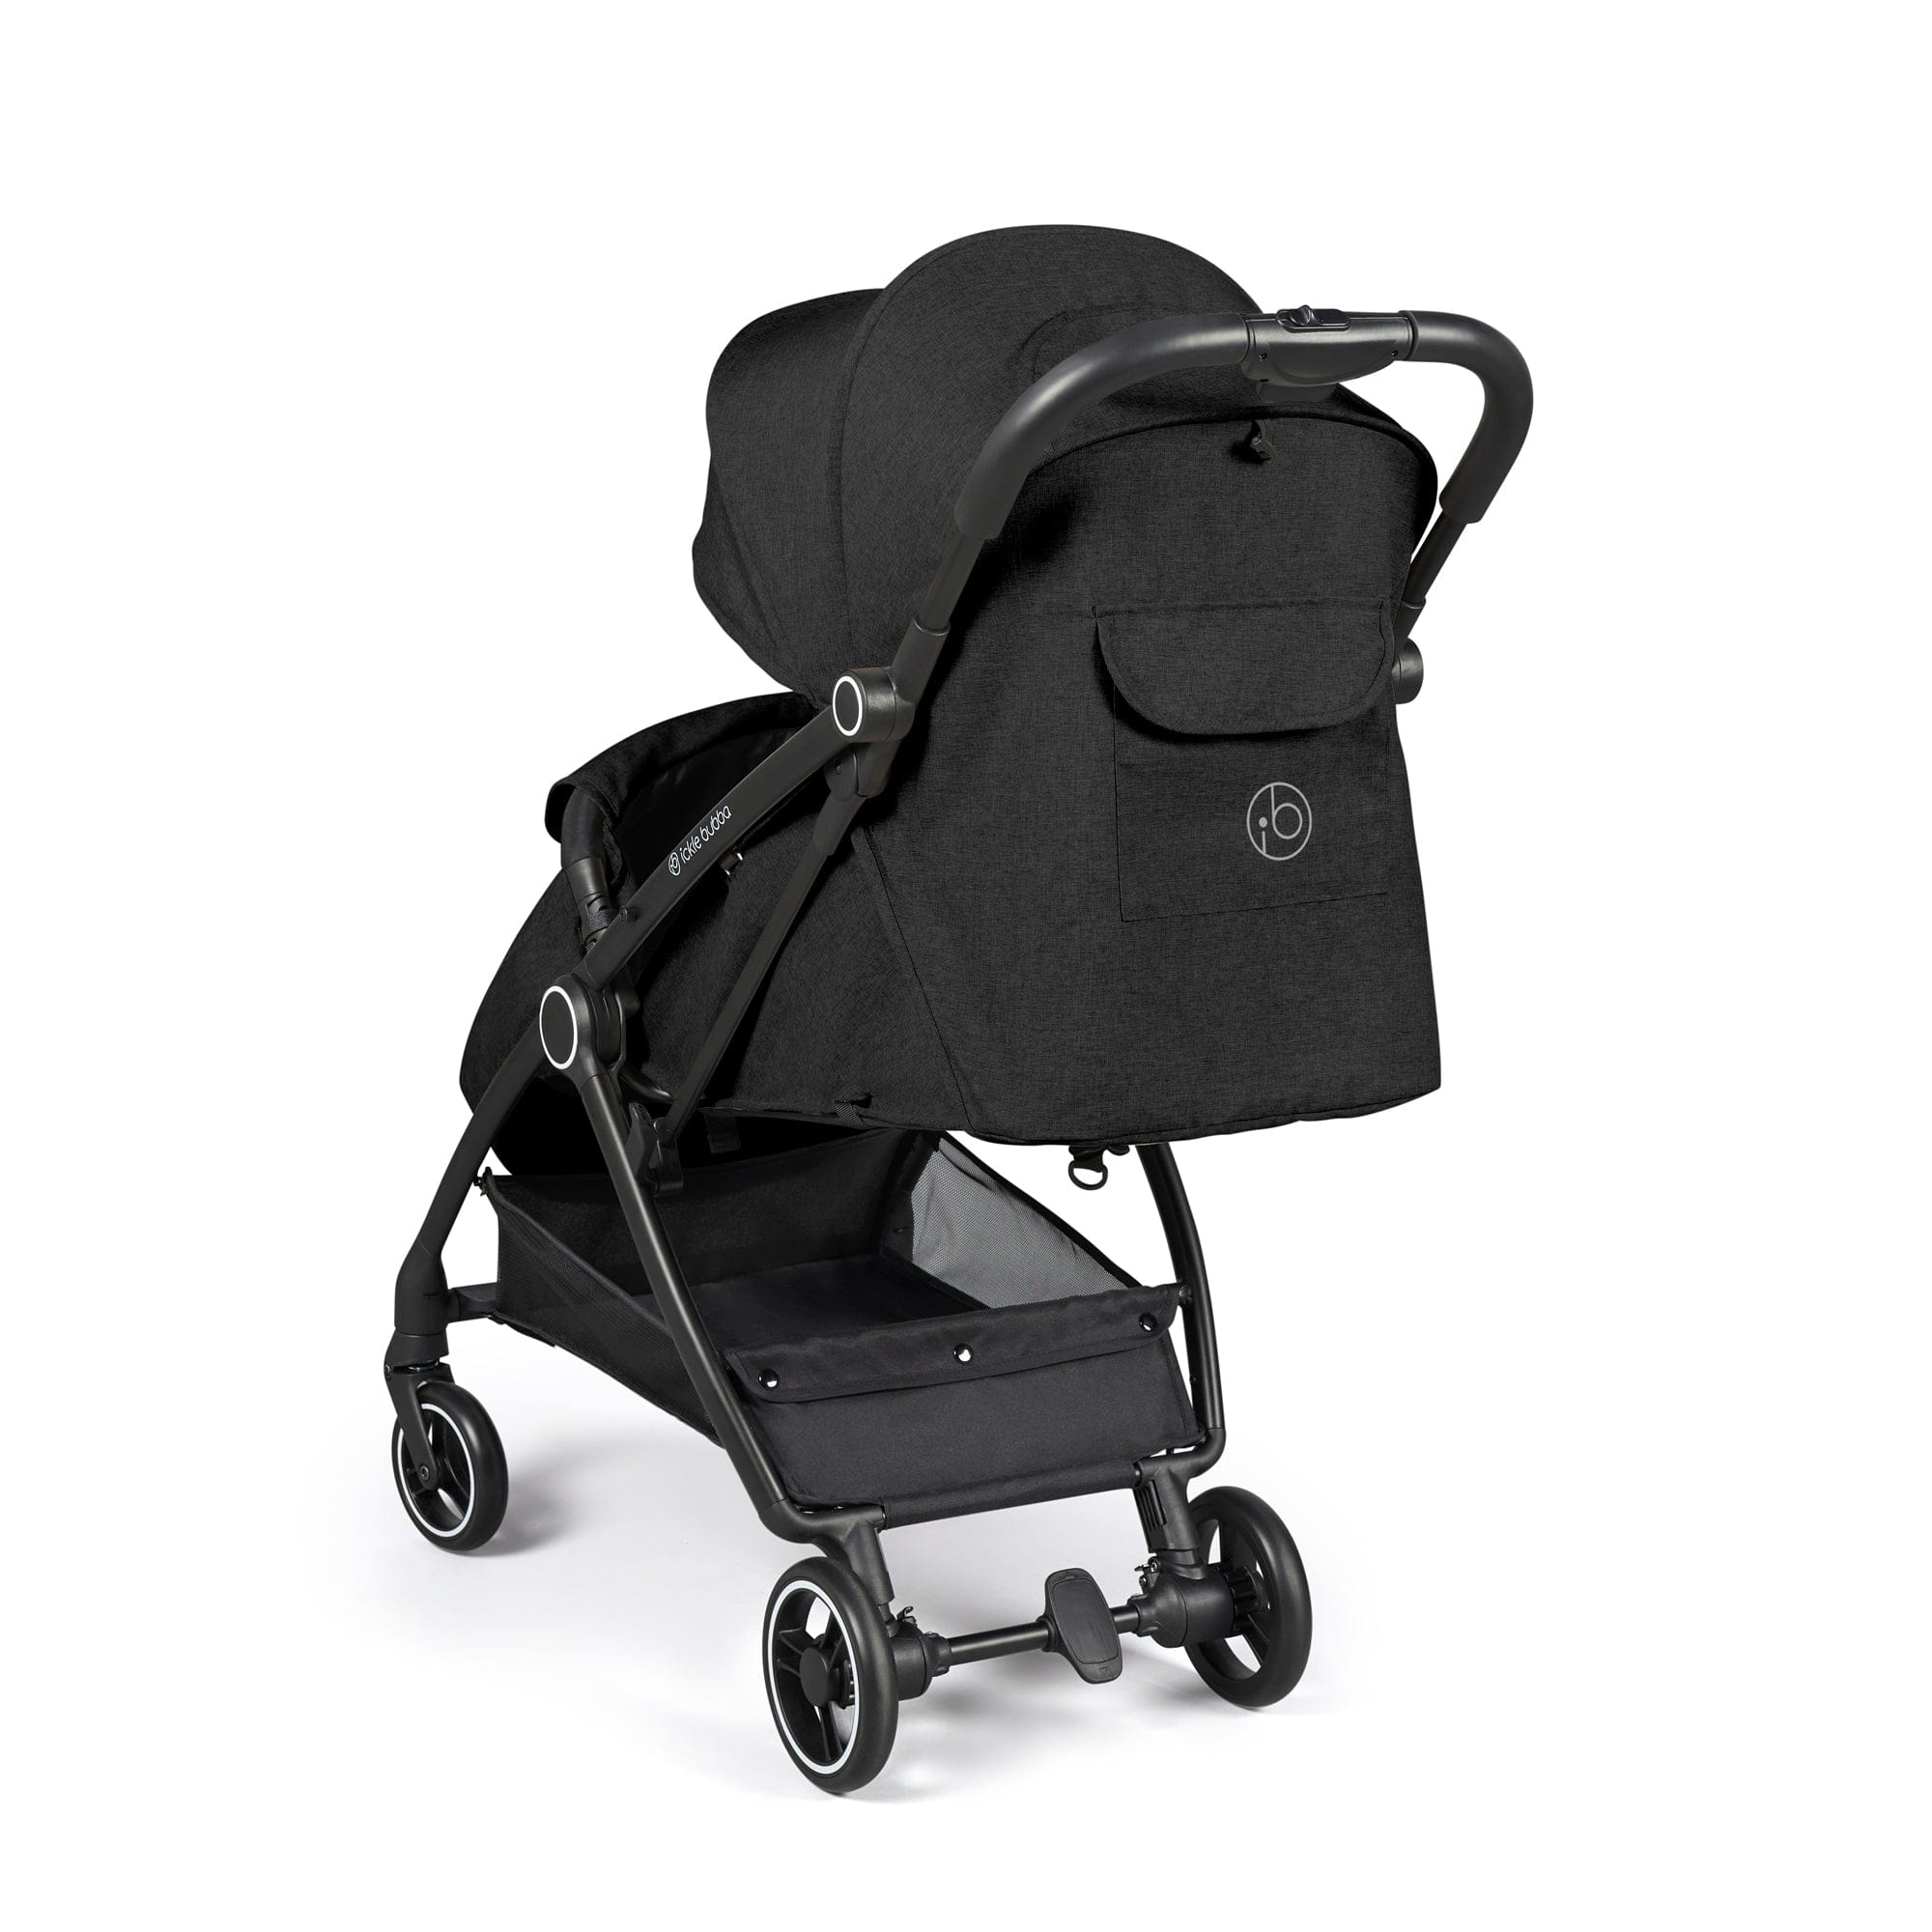 Ickle Bubba baby pushchairs Ickle Bubba Aries Prime Autofold Stroller - Black 15-005-300-001